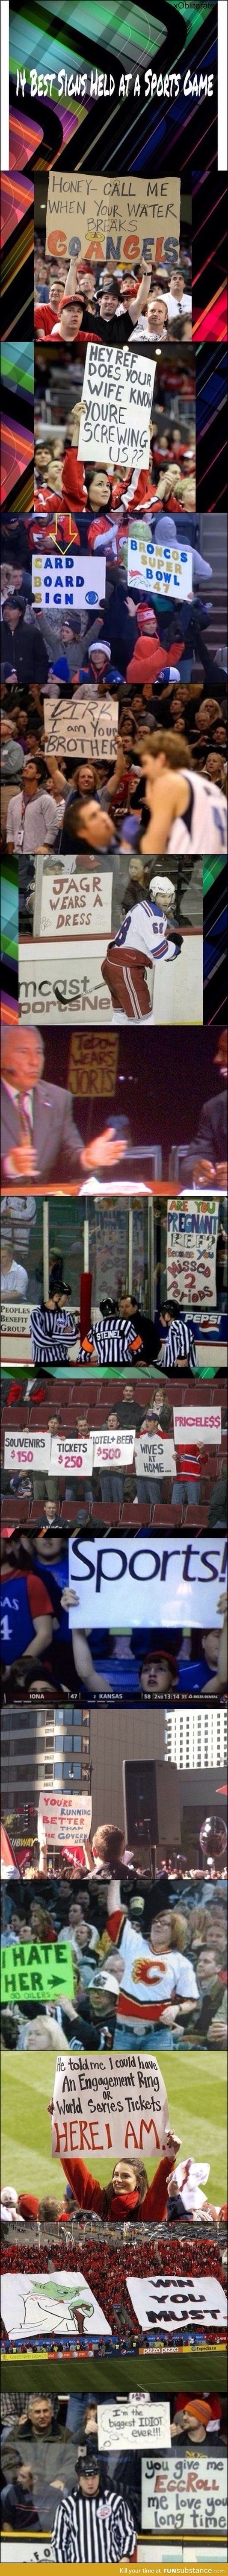 Sports game signs